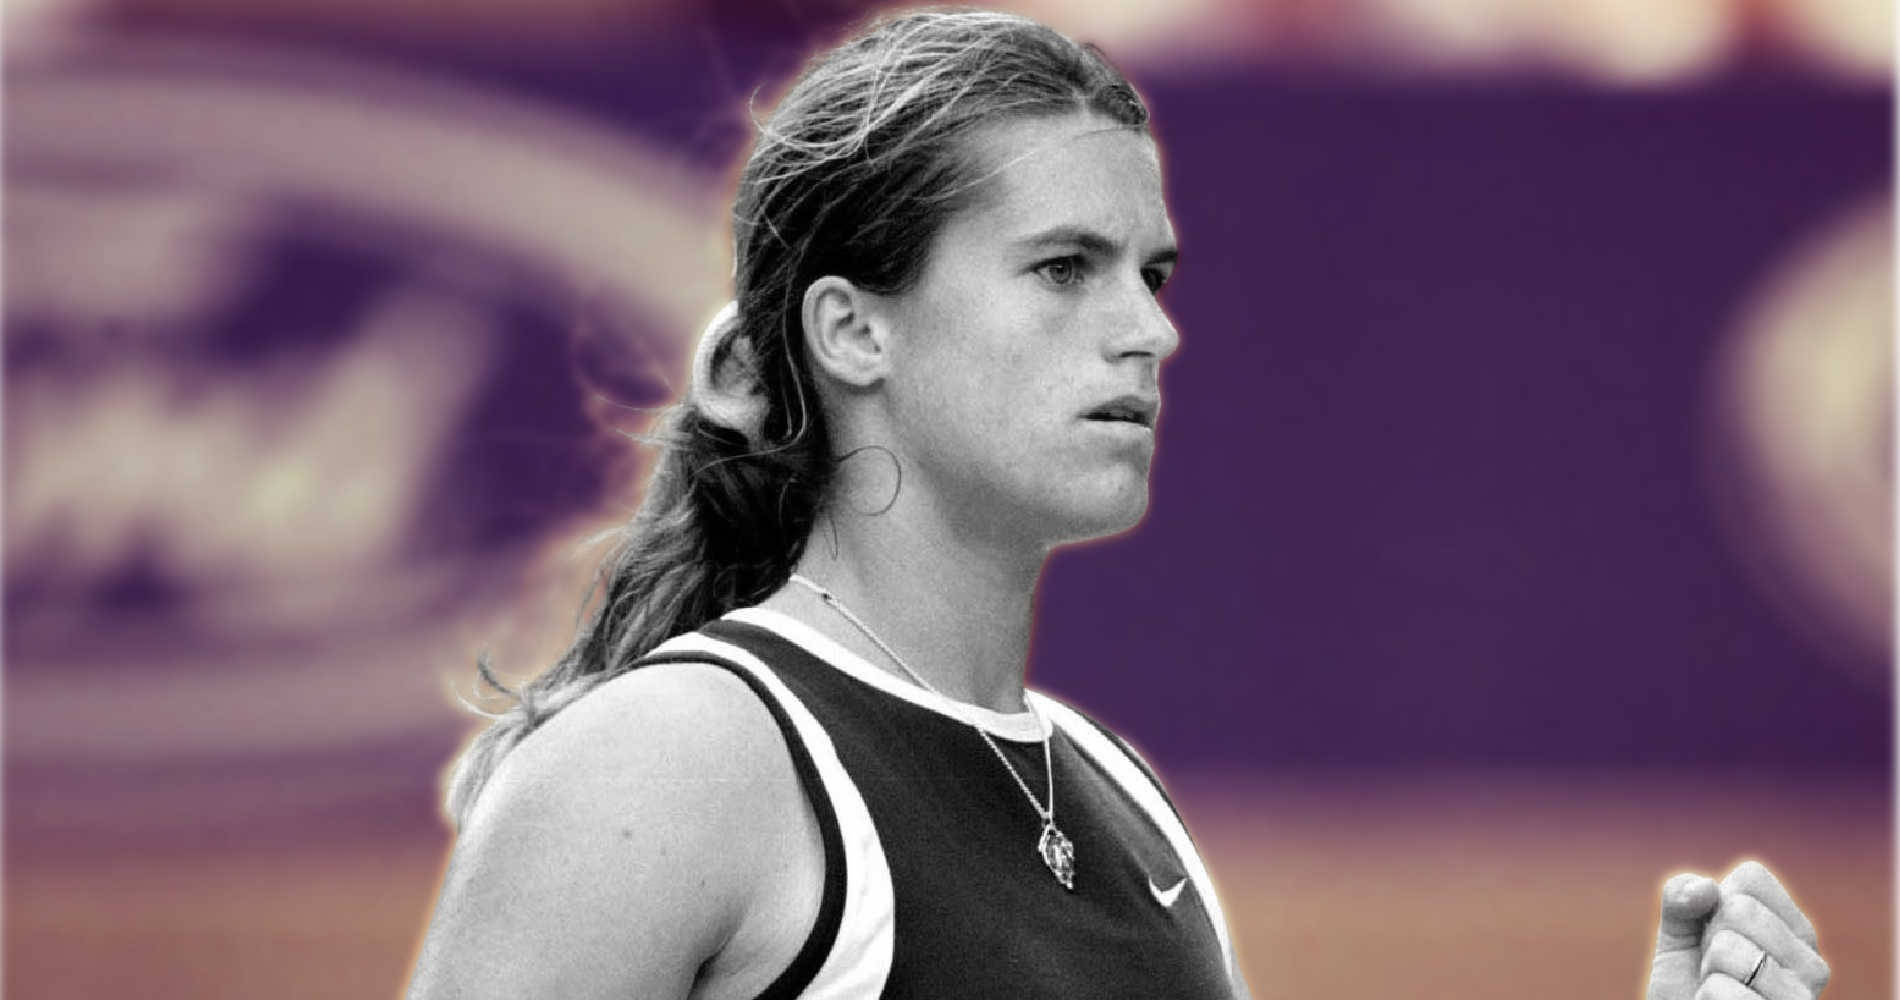 Svartvitamélie Mauresmo (as A Title For A Computer Or Mobile Wallpaper Featuring A Black-and-white Image Of Amélie Mauresmo) Wallpaper